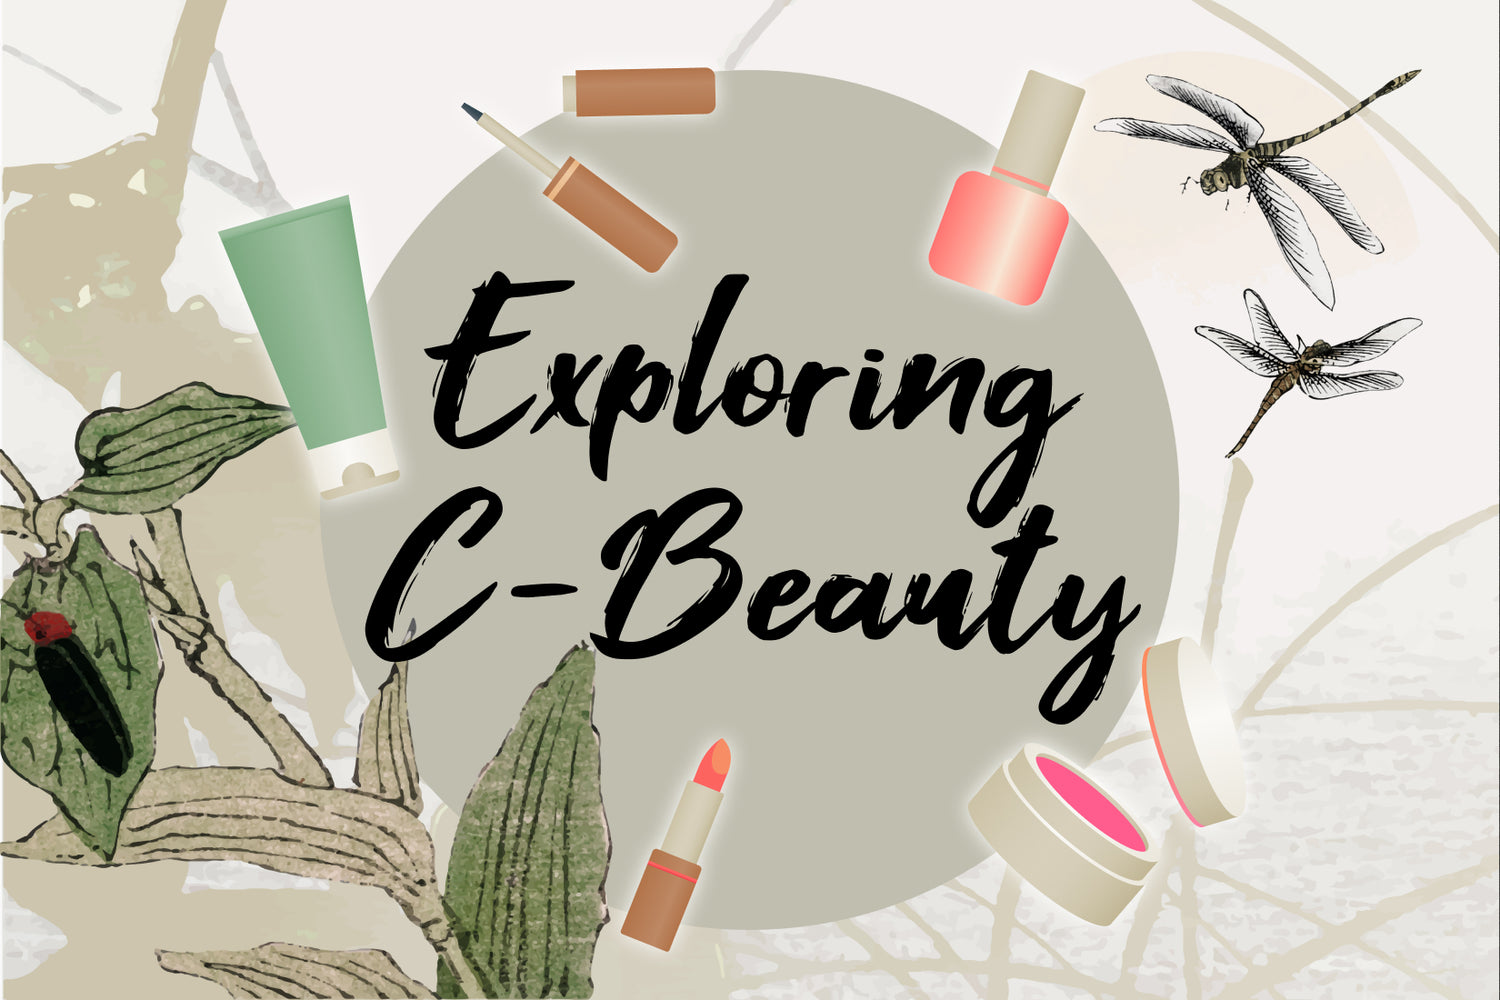 Top 2023 Beauty Trends You Need To Know-C-Beauty